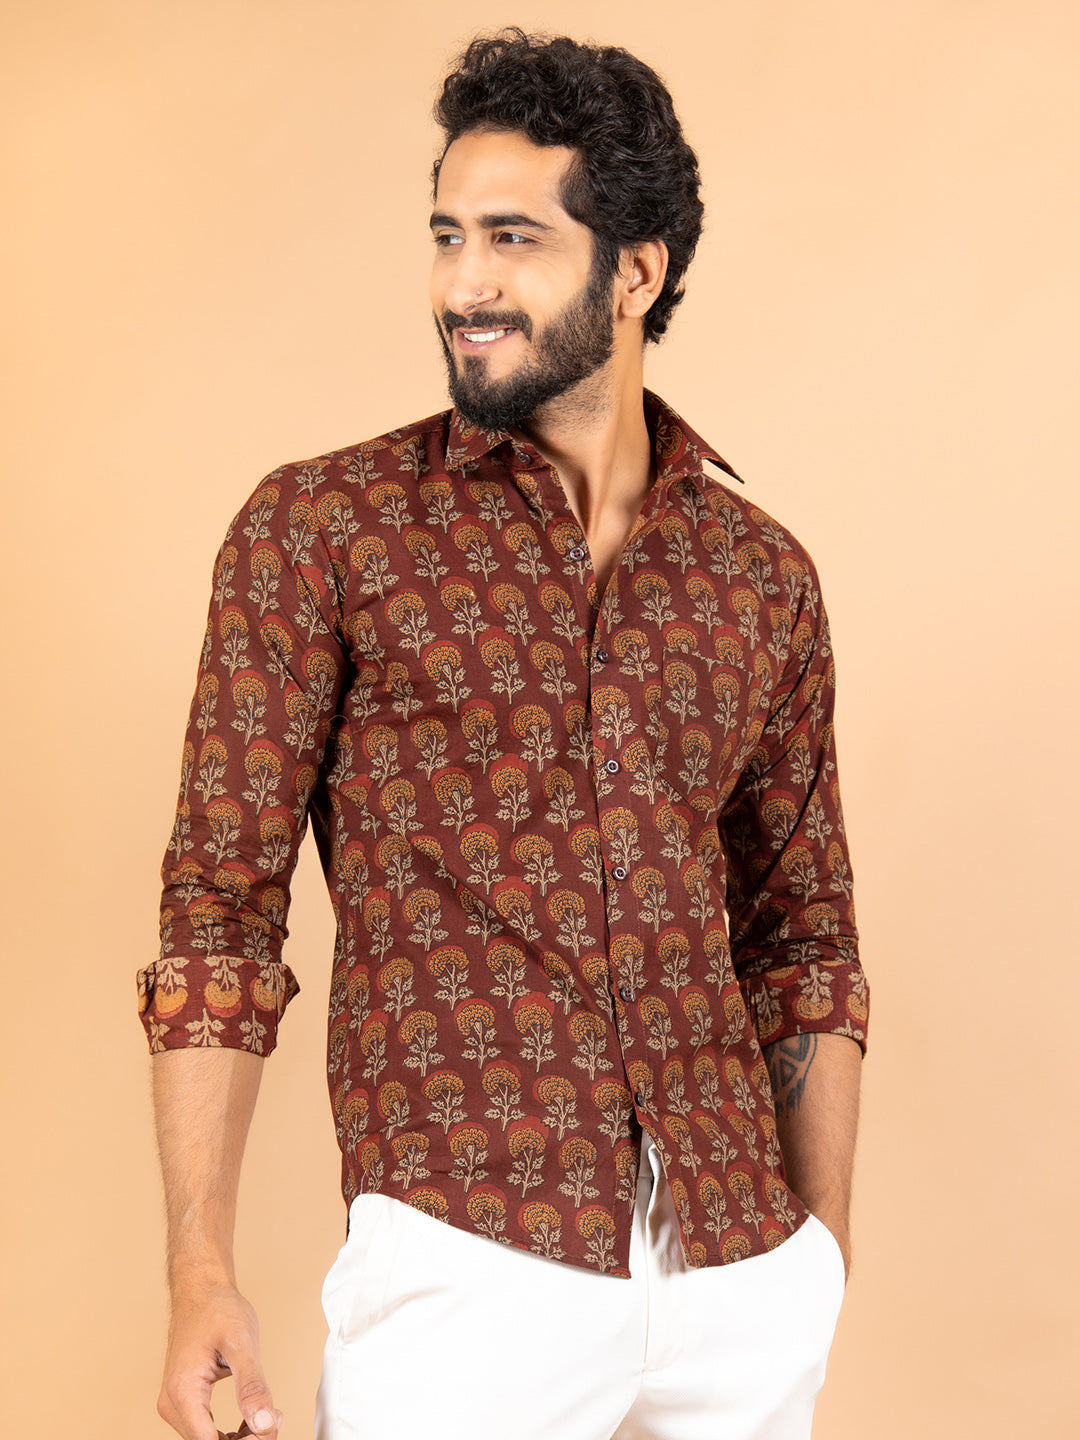 red printed shirt for men